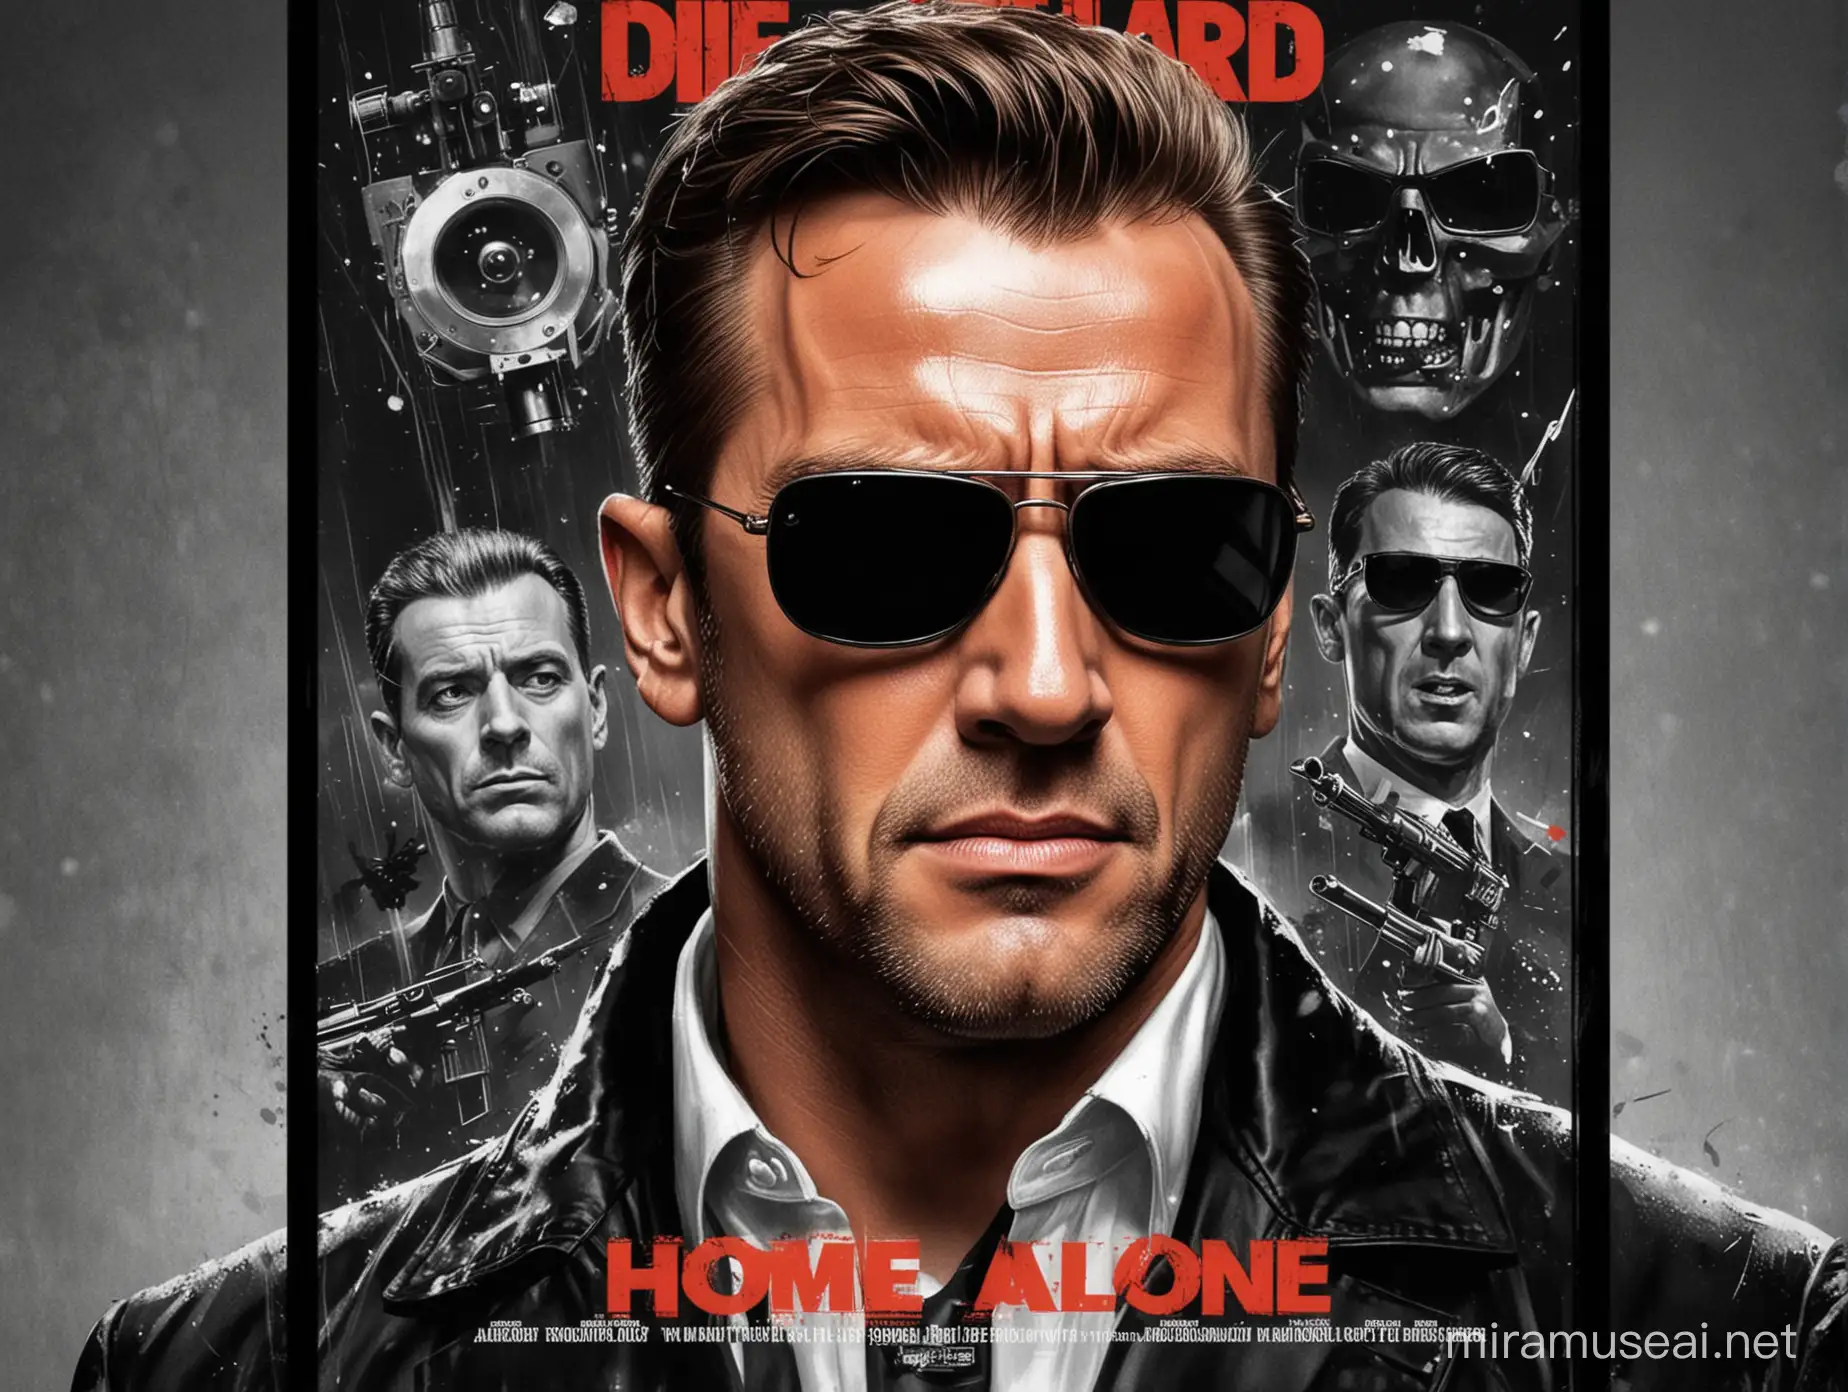 The film is a combination and mixture of the following films: Die hard.Terminator Home Alone Dr. Strangelove.james bond.movie poster in art classic style